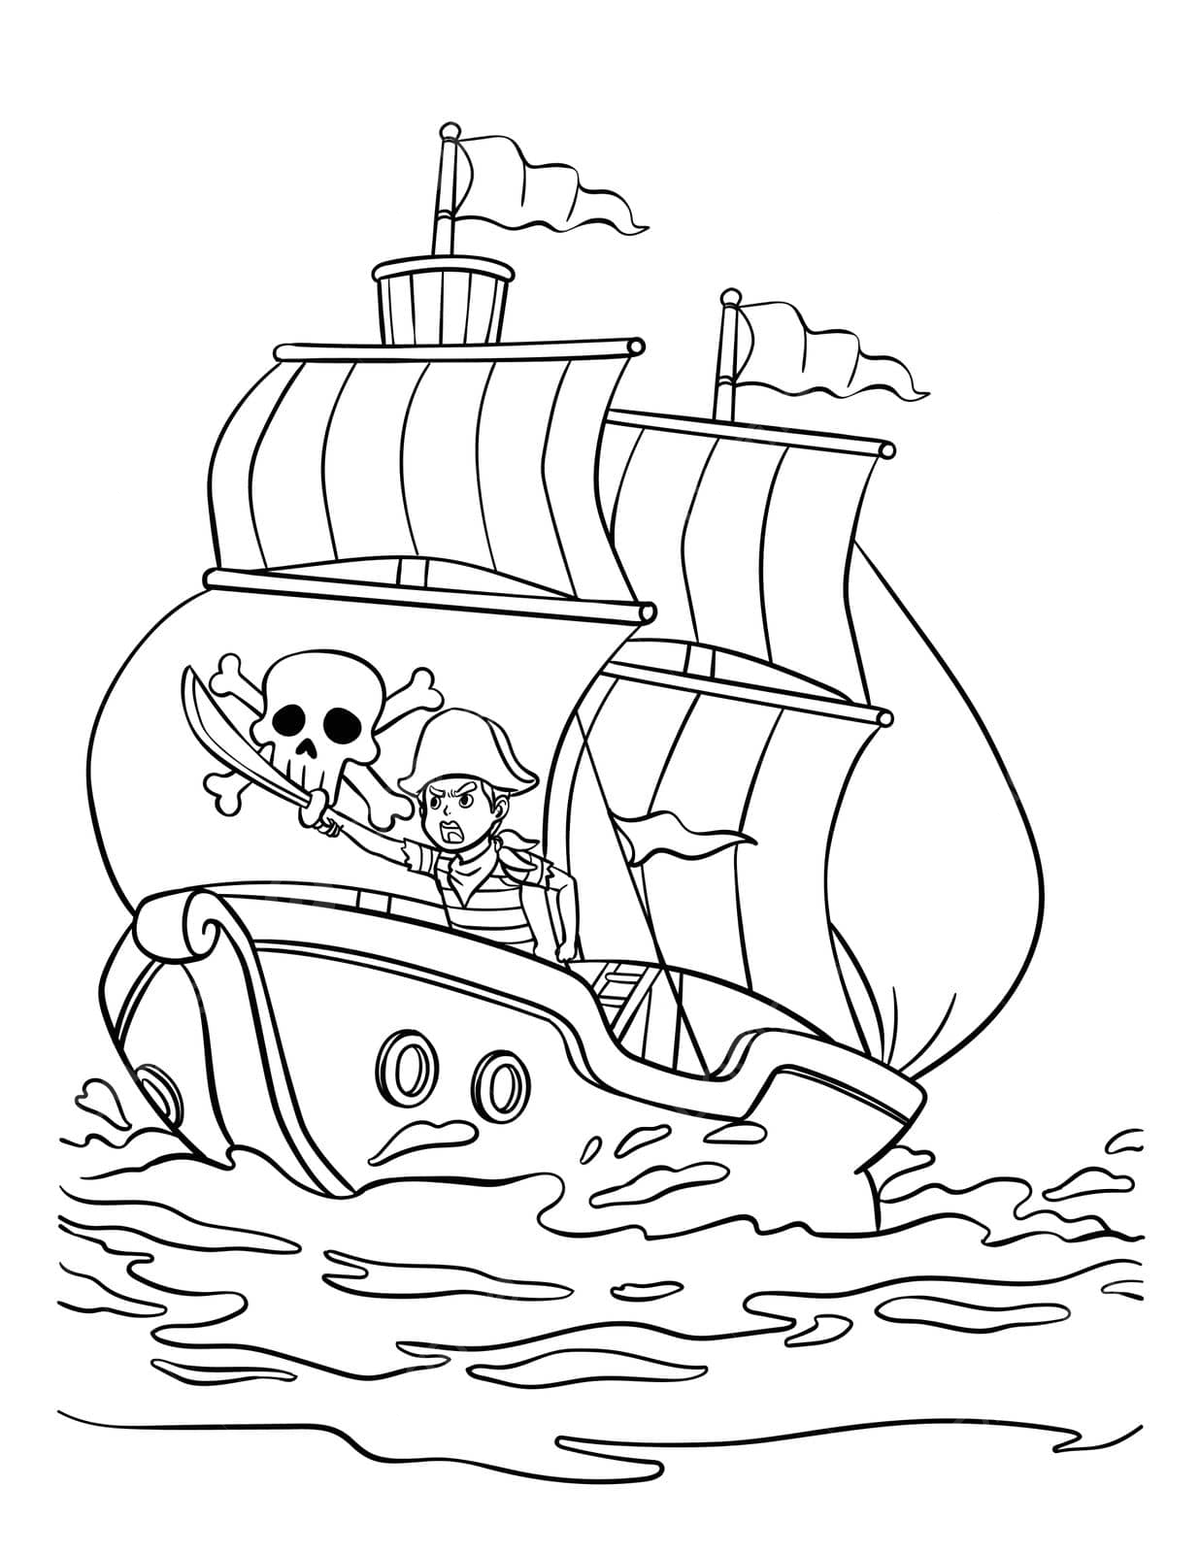 Pirate ship isolated coloring page for kids sword silhouette graphic vector sword drawing rat drawing ship drawing png and vector with transparent background for free download